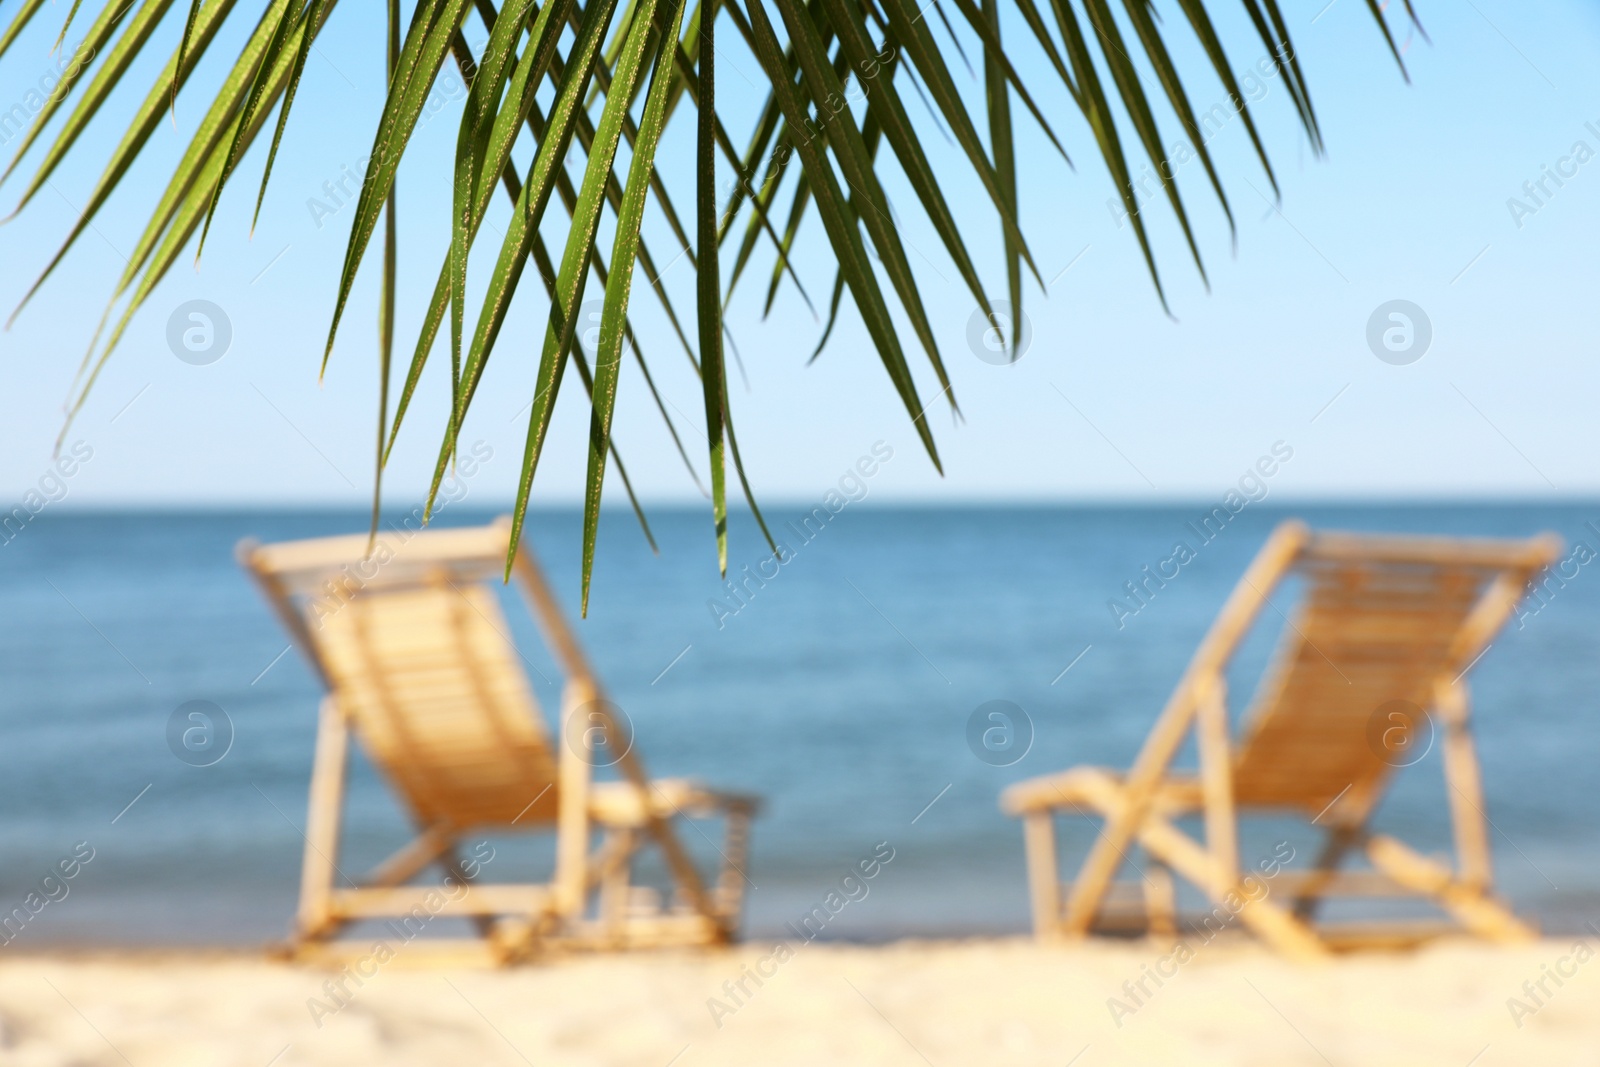 Photo of Blurred view of wooden beach sunbeds on sandy shore, focus on palm leaves